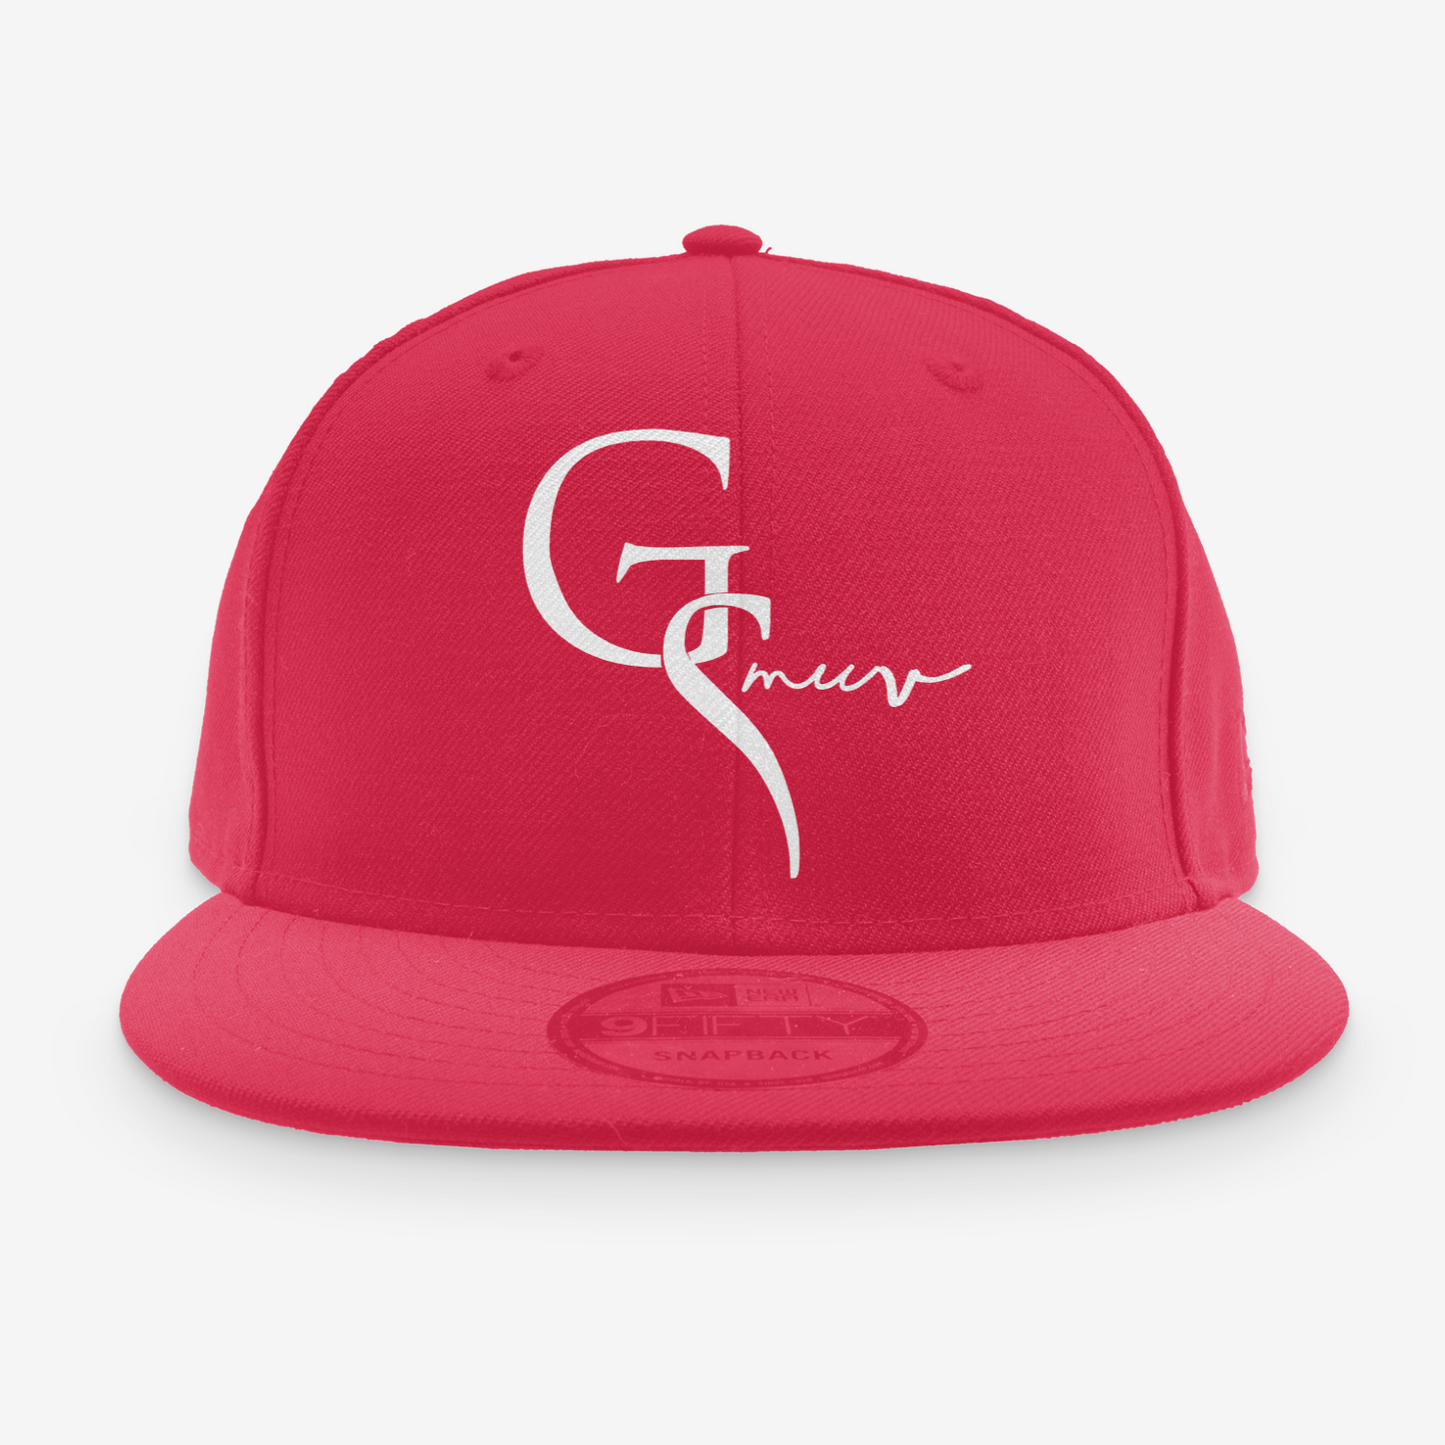 Red New Era hat with white logo of GSMUV